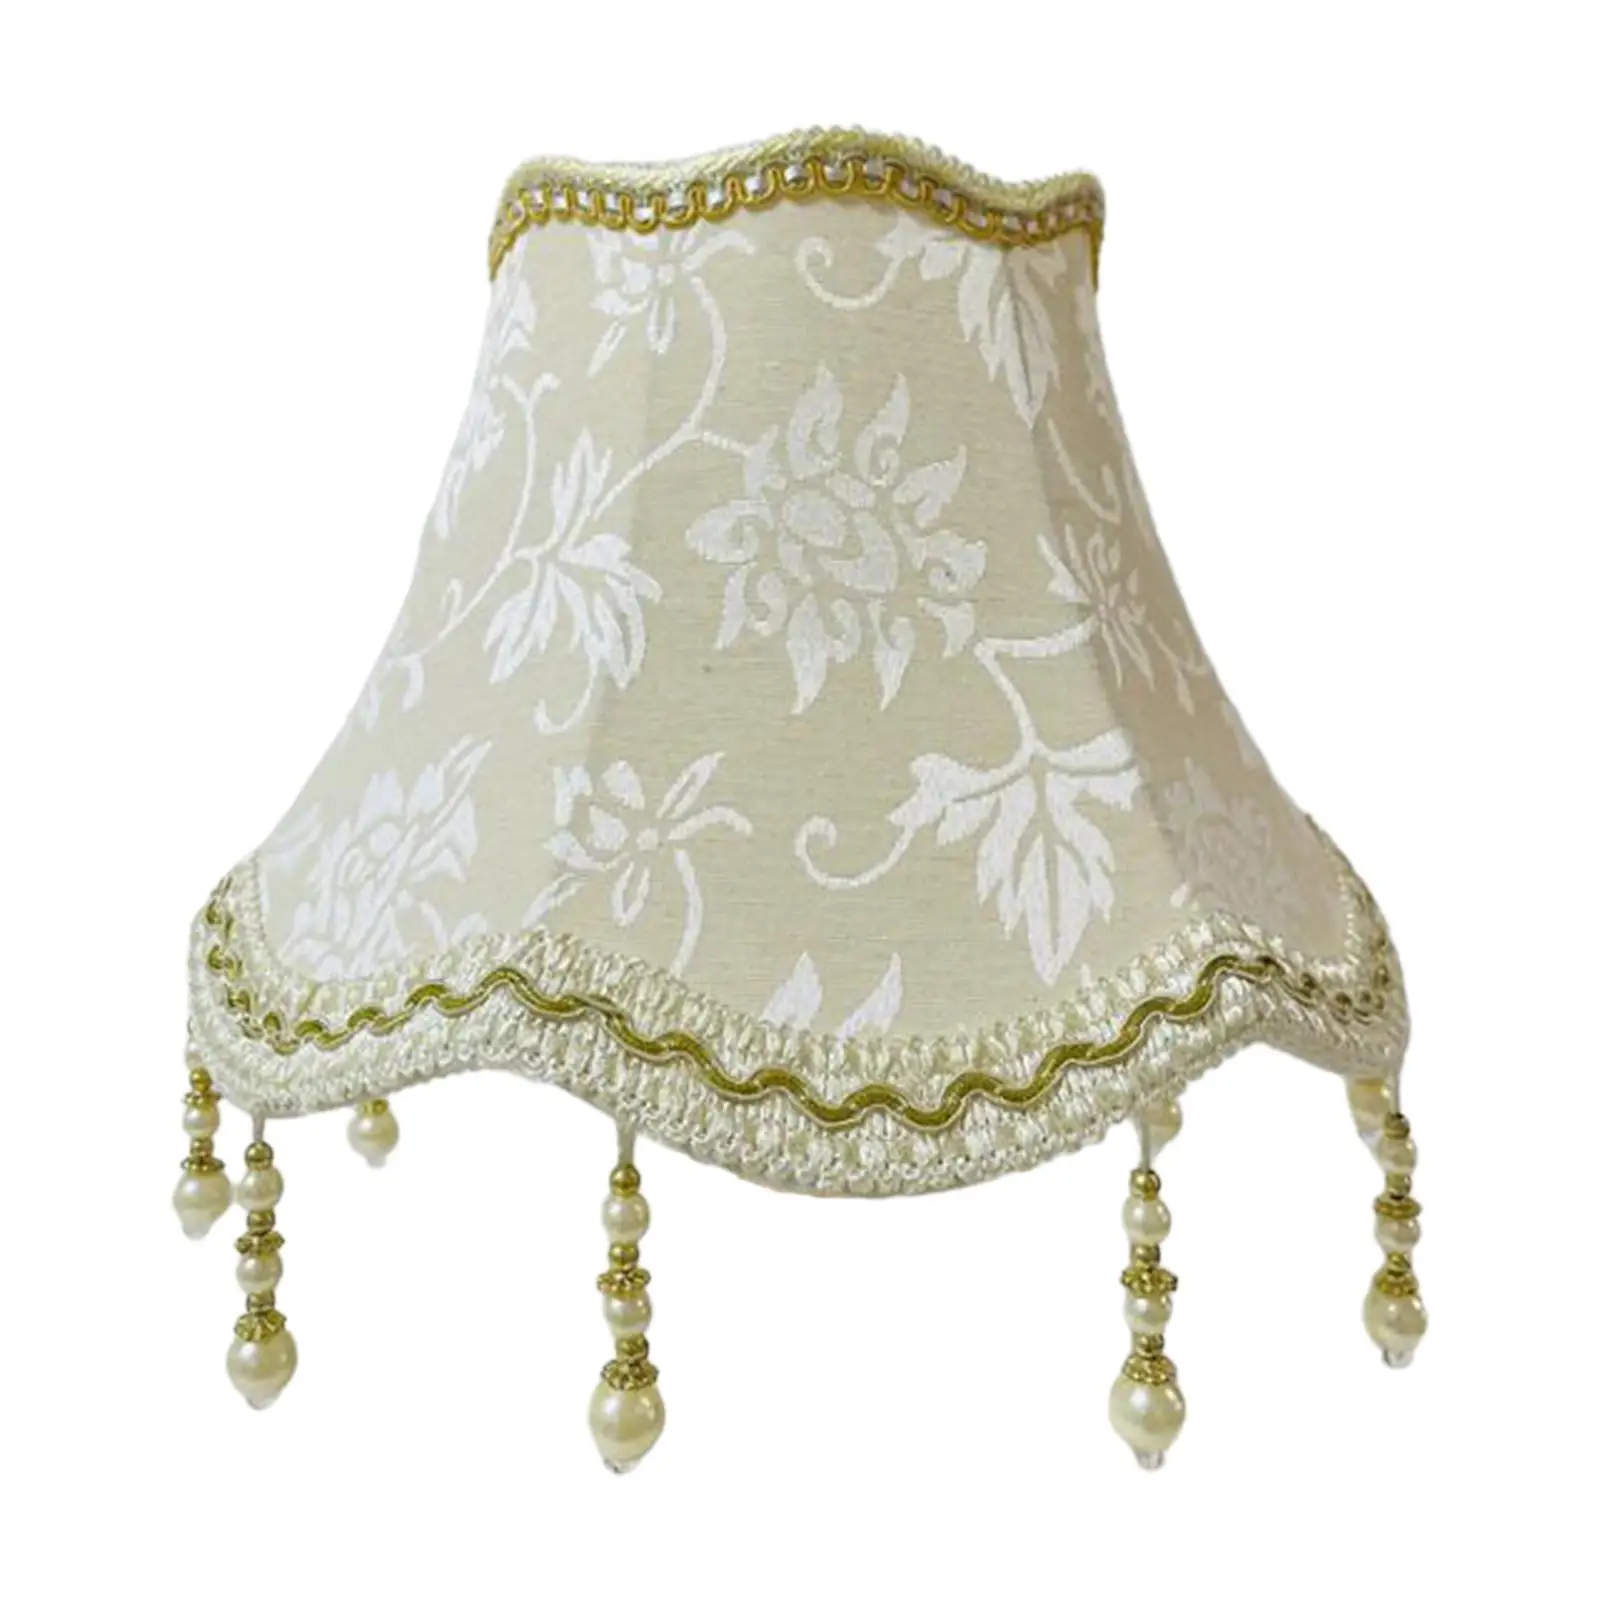 Fabric Lampshade Floor Lamps Dome Lamp Shade Fringe Lamp Shade for Living Room Teahouse Kitchen Island Farmhouse Outdoor